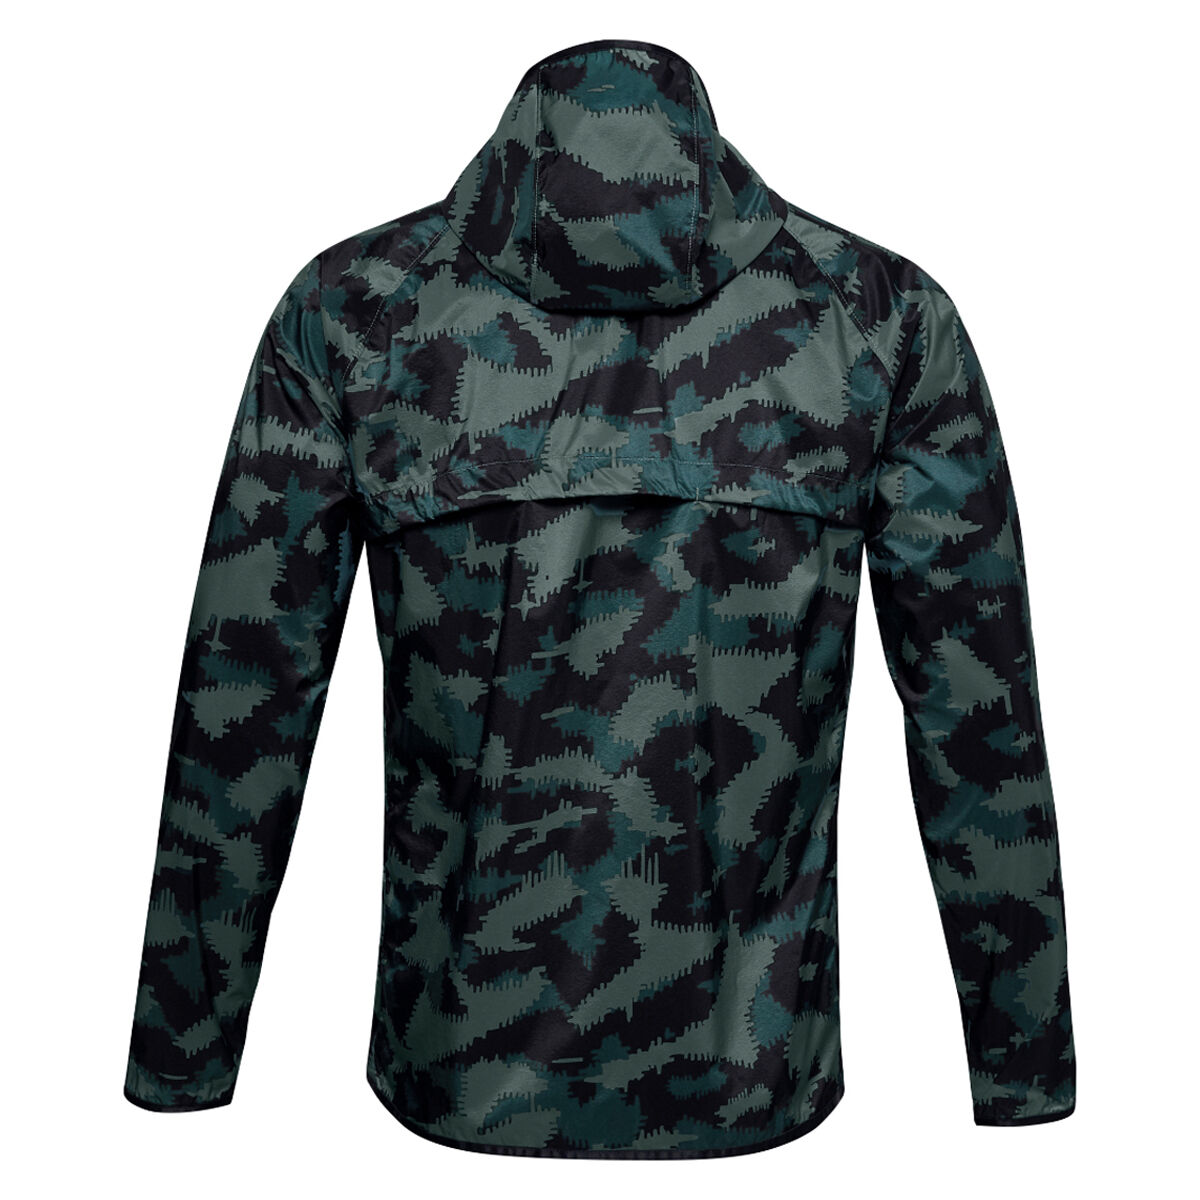 under armour military jacket